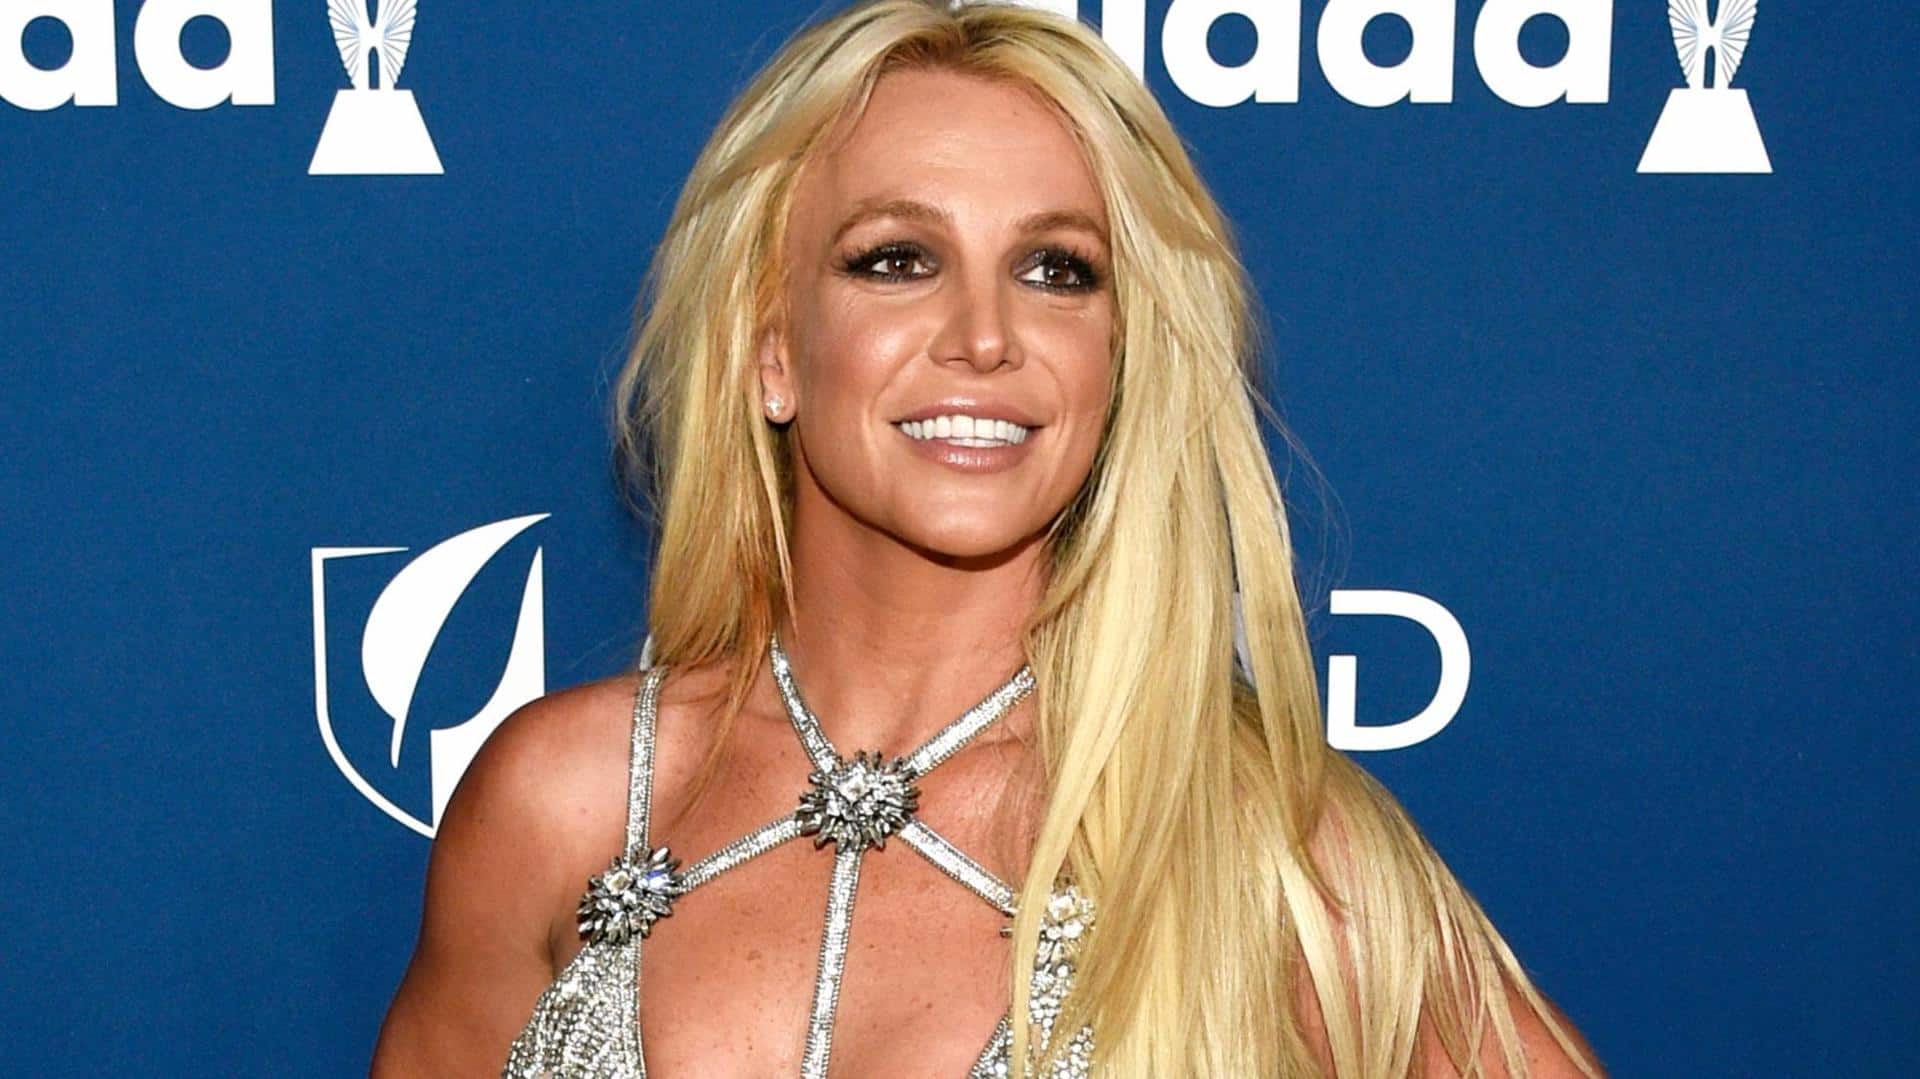 Britney Spears calls out 'TMZ'; tags them as 'trashiest'